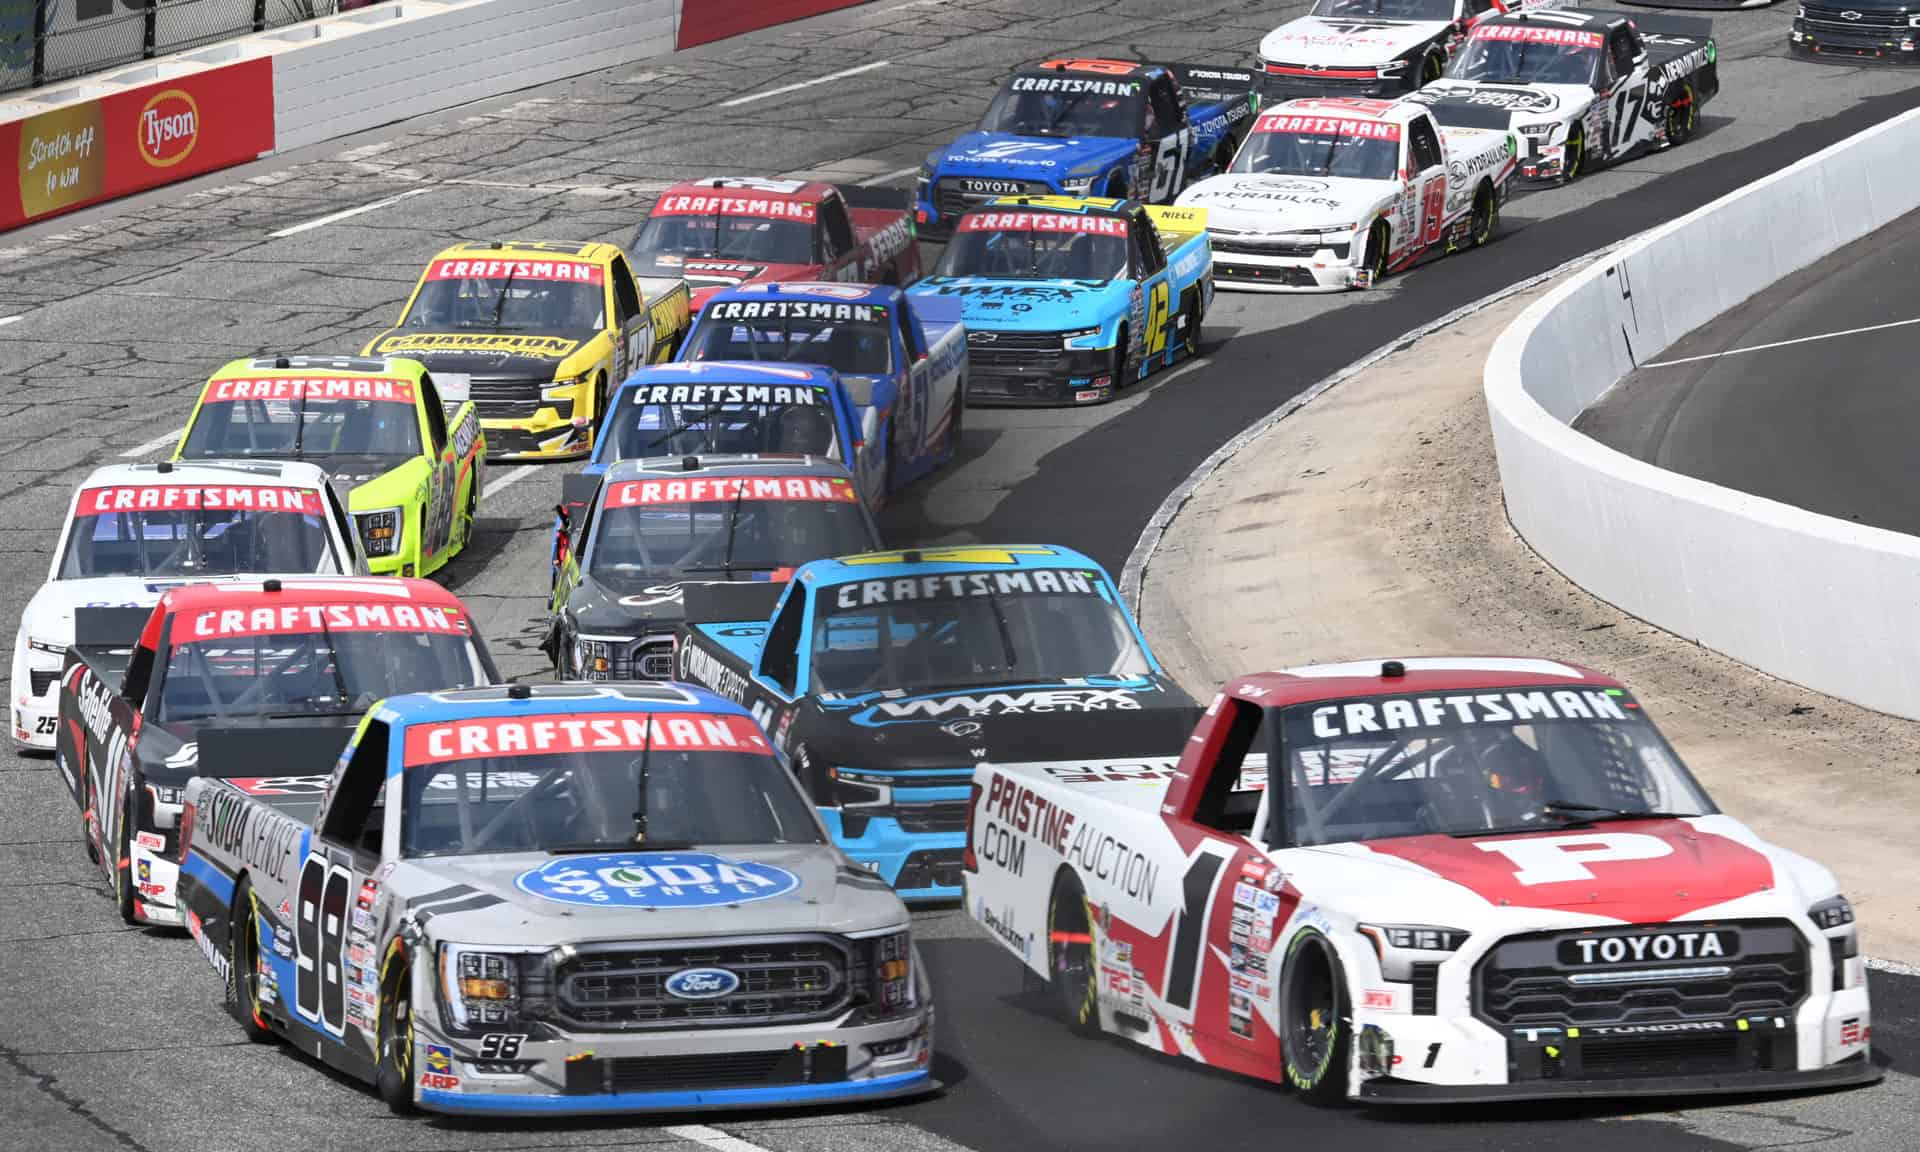 Bubba Wallace had fun in the NASCAR Craftsman Truck Series at North Wilkesboro Speedway while preparing for the All-Star Race.